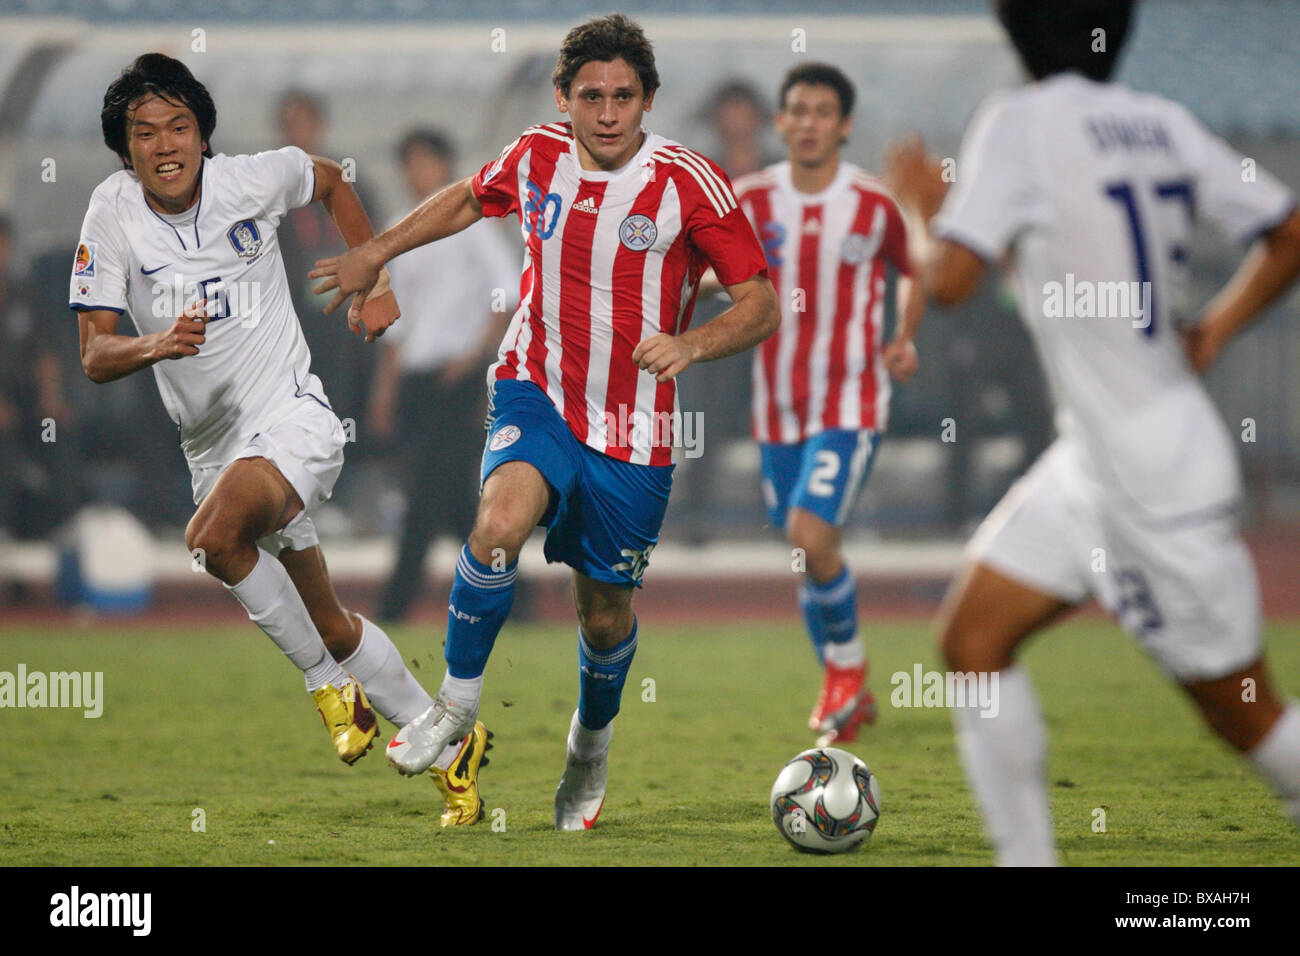 Luis Caballero of Paraguay (20) controls the ball against South Korea during a 2009 U-20 World Cup round of 16 match Oct 5, 2009 Stock Photo